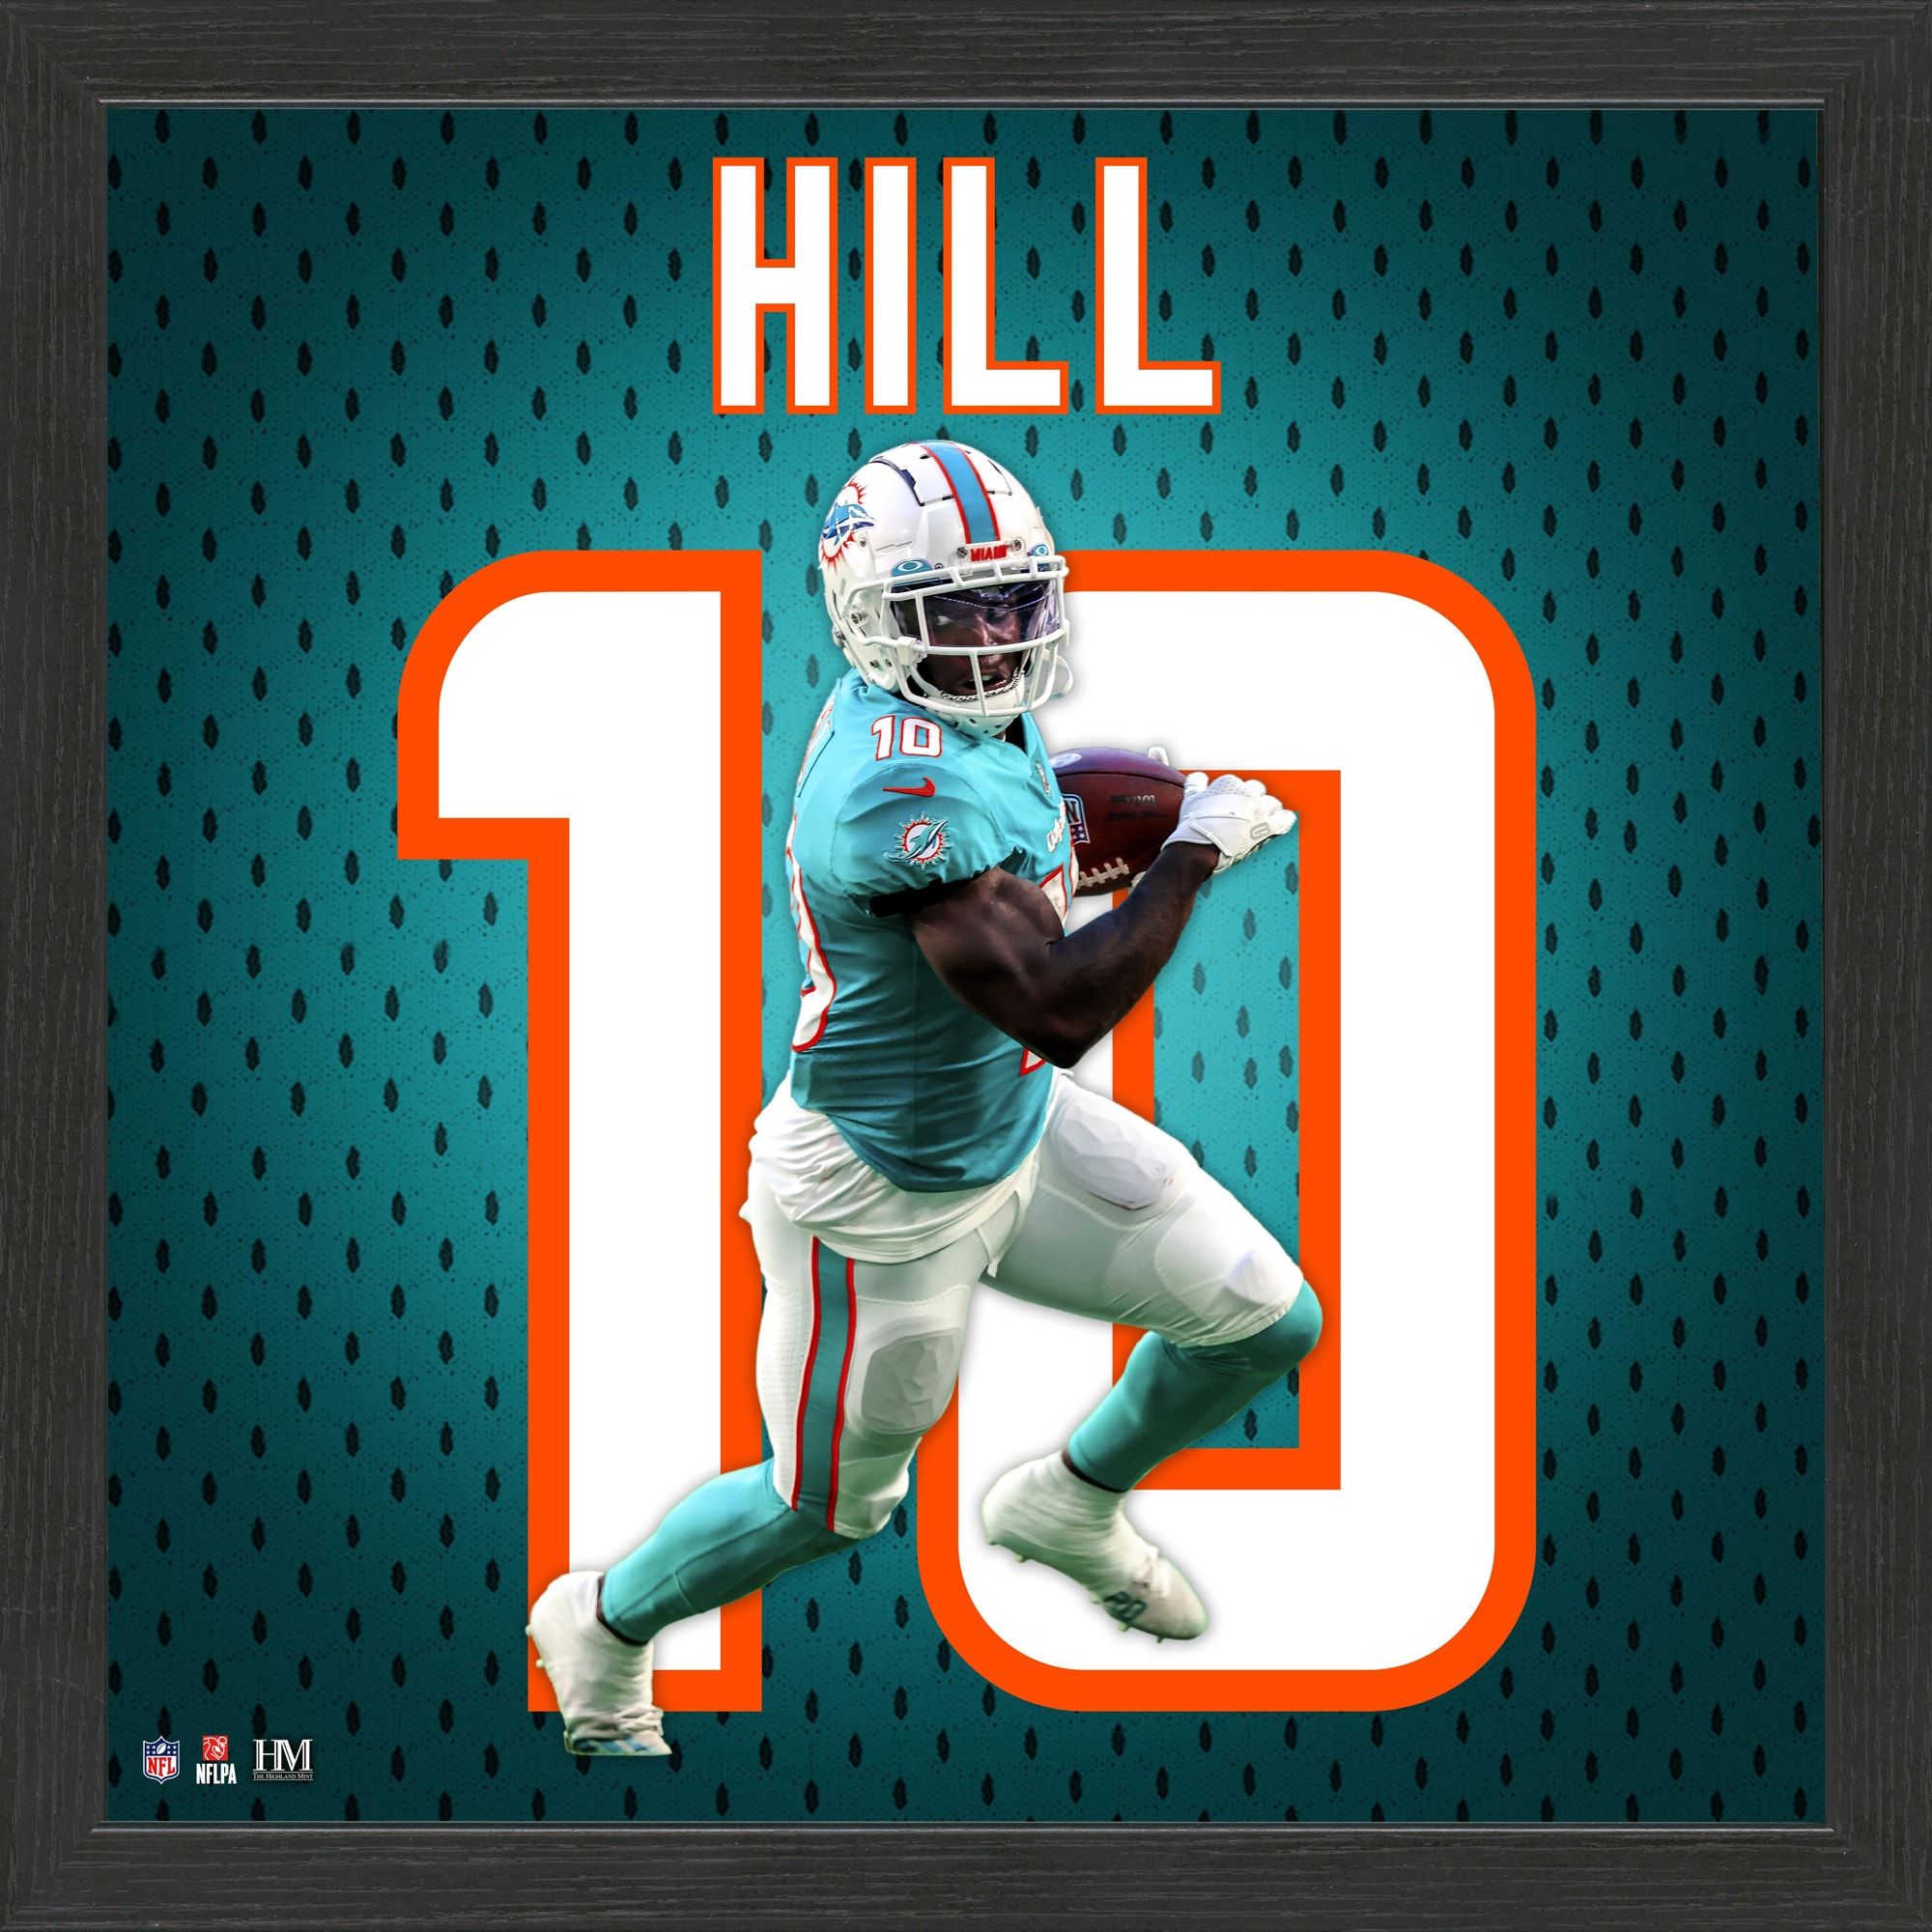 Tyreek Hill Dolphins Wallpapers - Top Free Tyreek Hill Dolphins ...